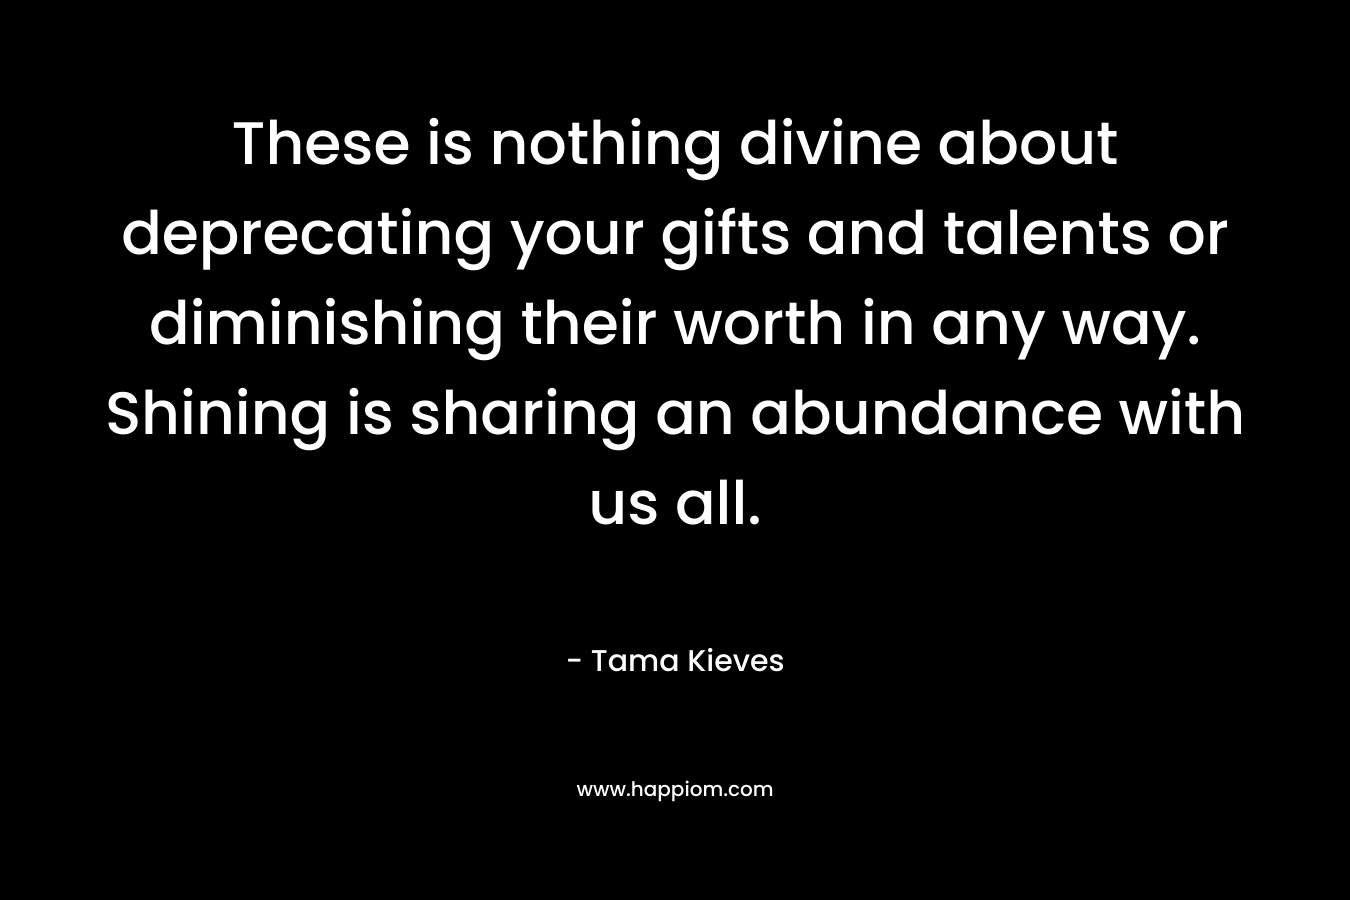 These is nothing divine about deprecating your gifts and talents or diminishing their worth in any way. Shining is sharing an abundance with us all.